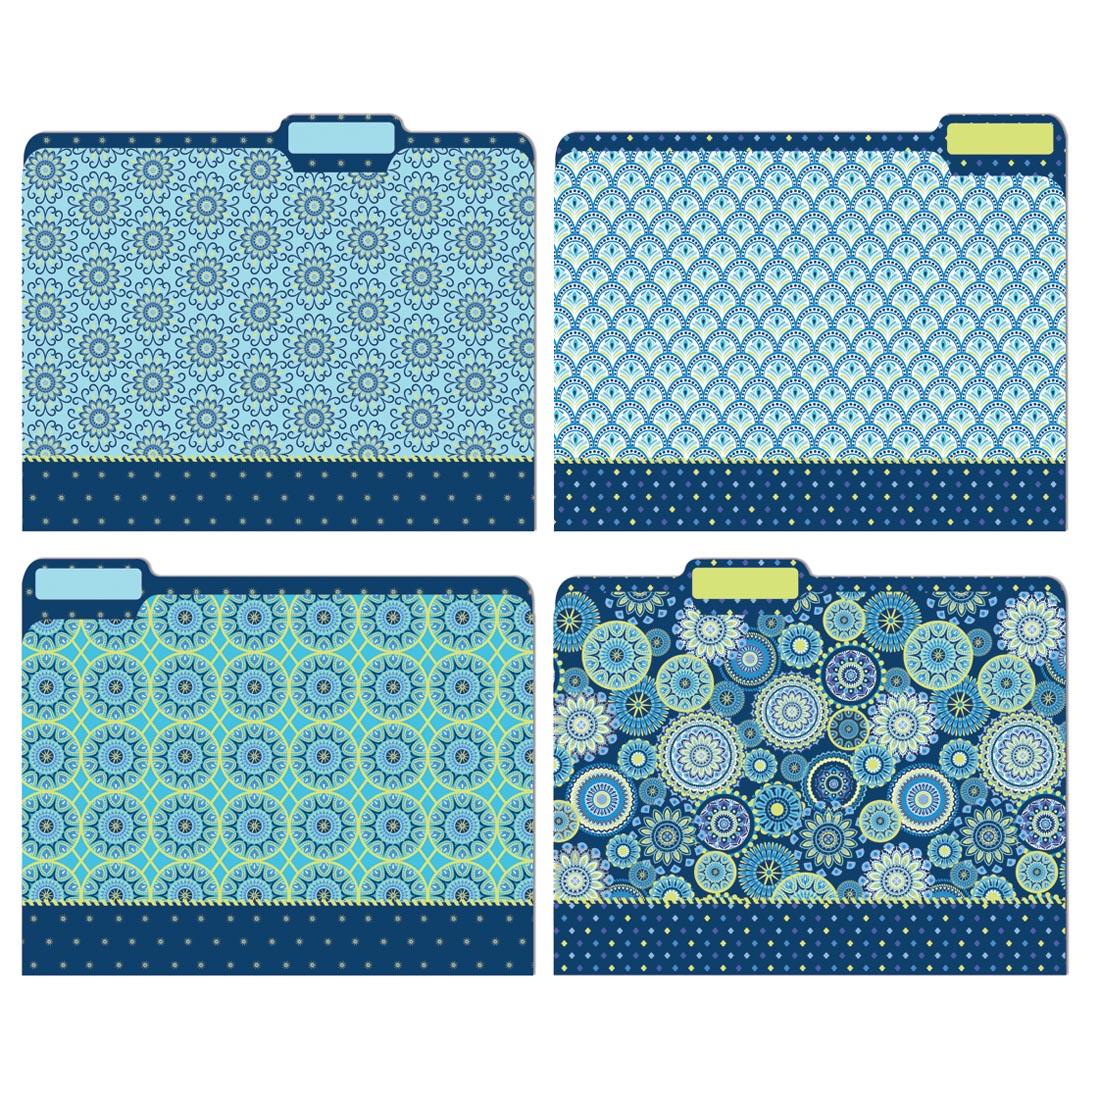 File Folders from the Blue Harmony collection by Eureka